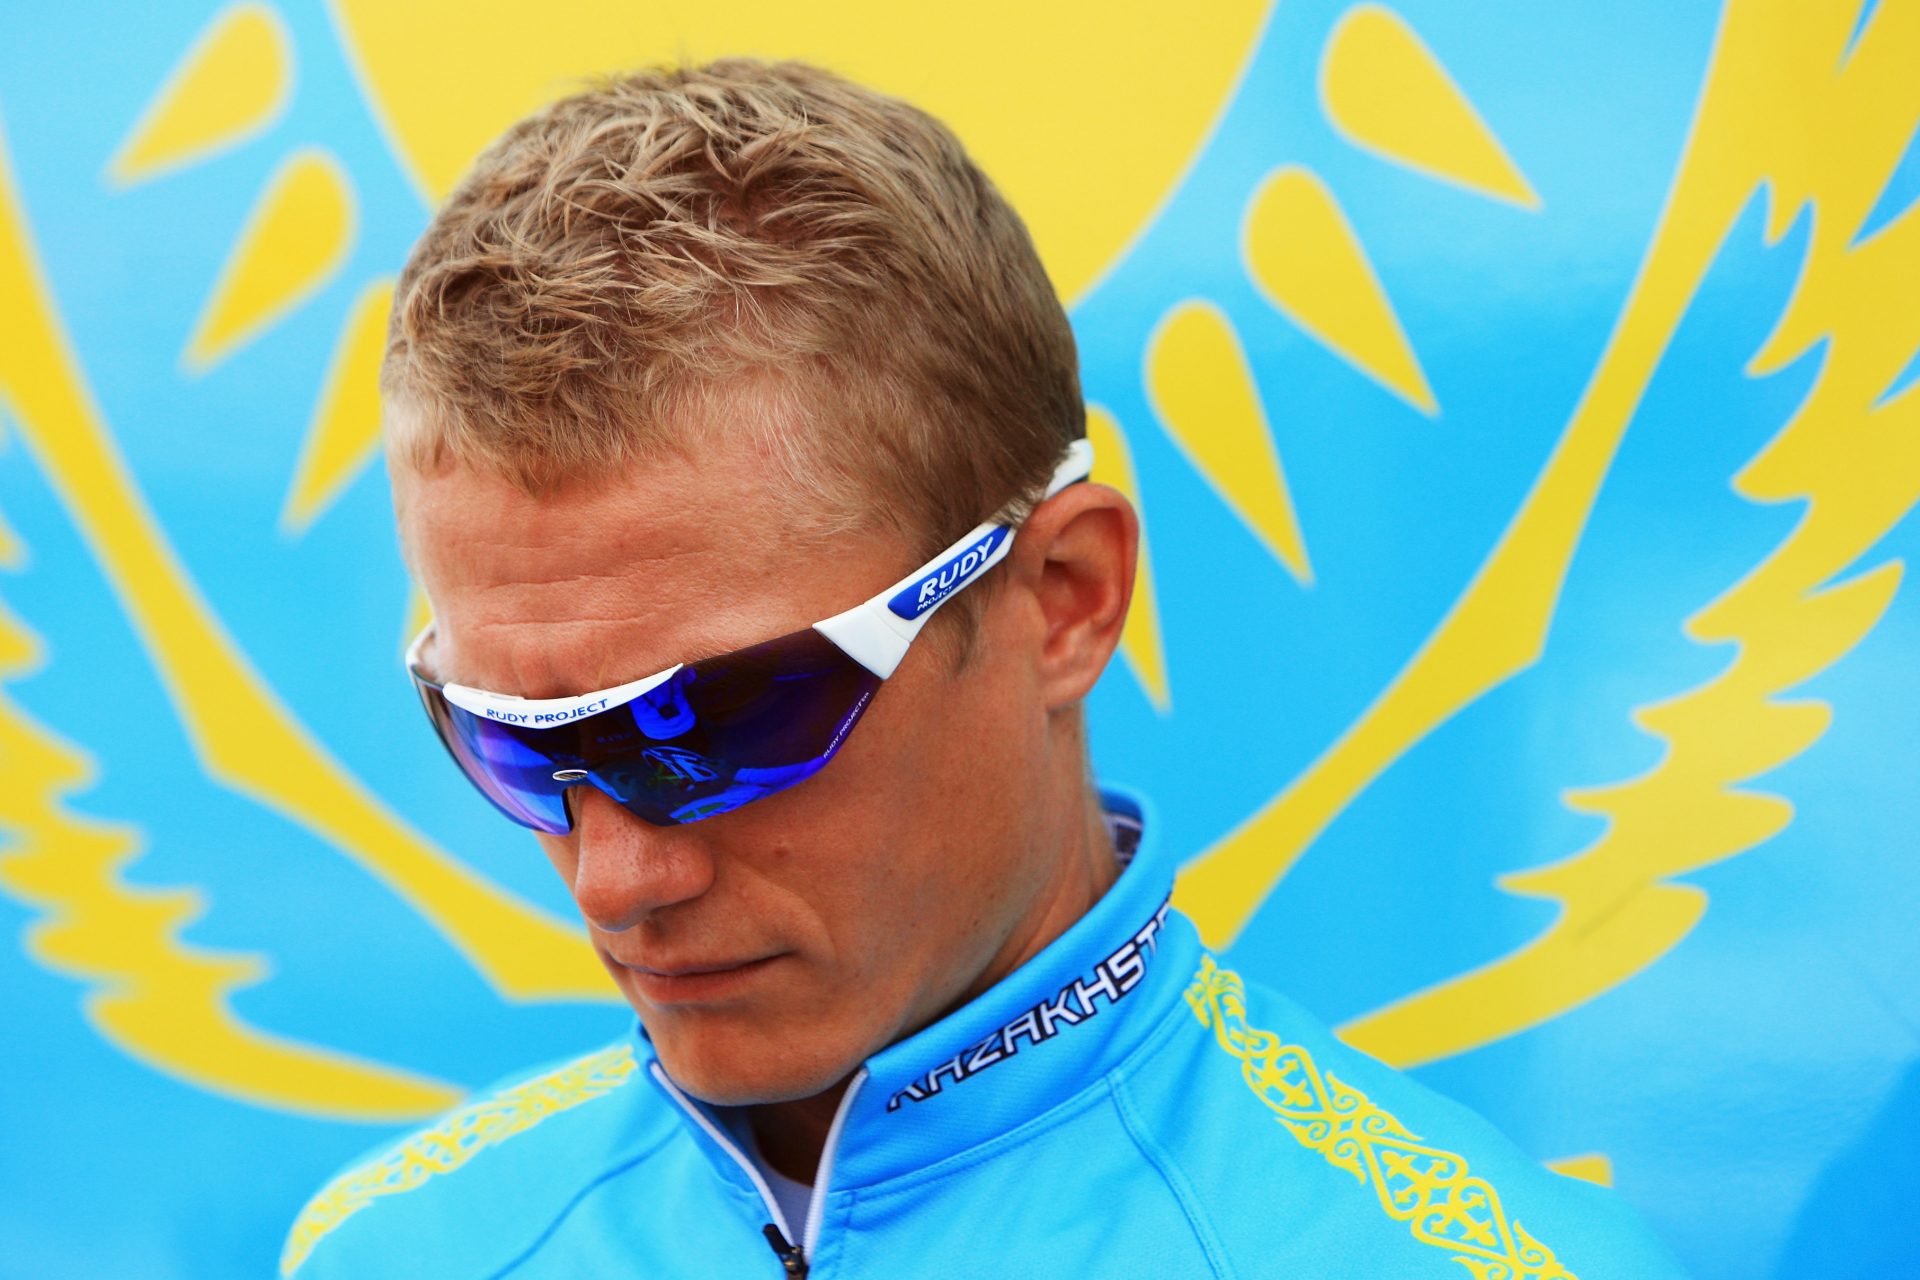 What happened to Alexander Vinokourov, the biggest cheater in the history of cycling?